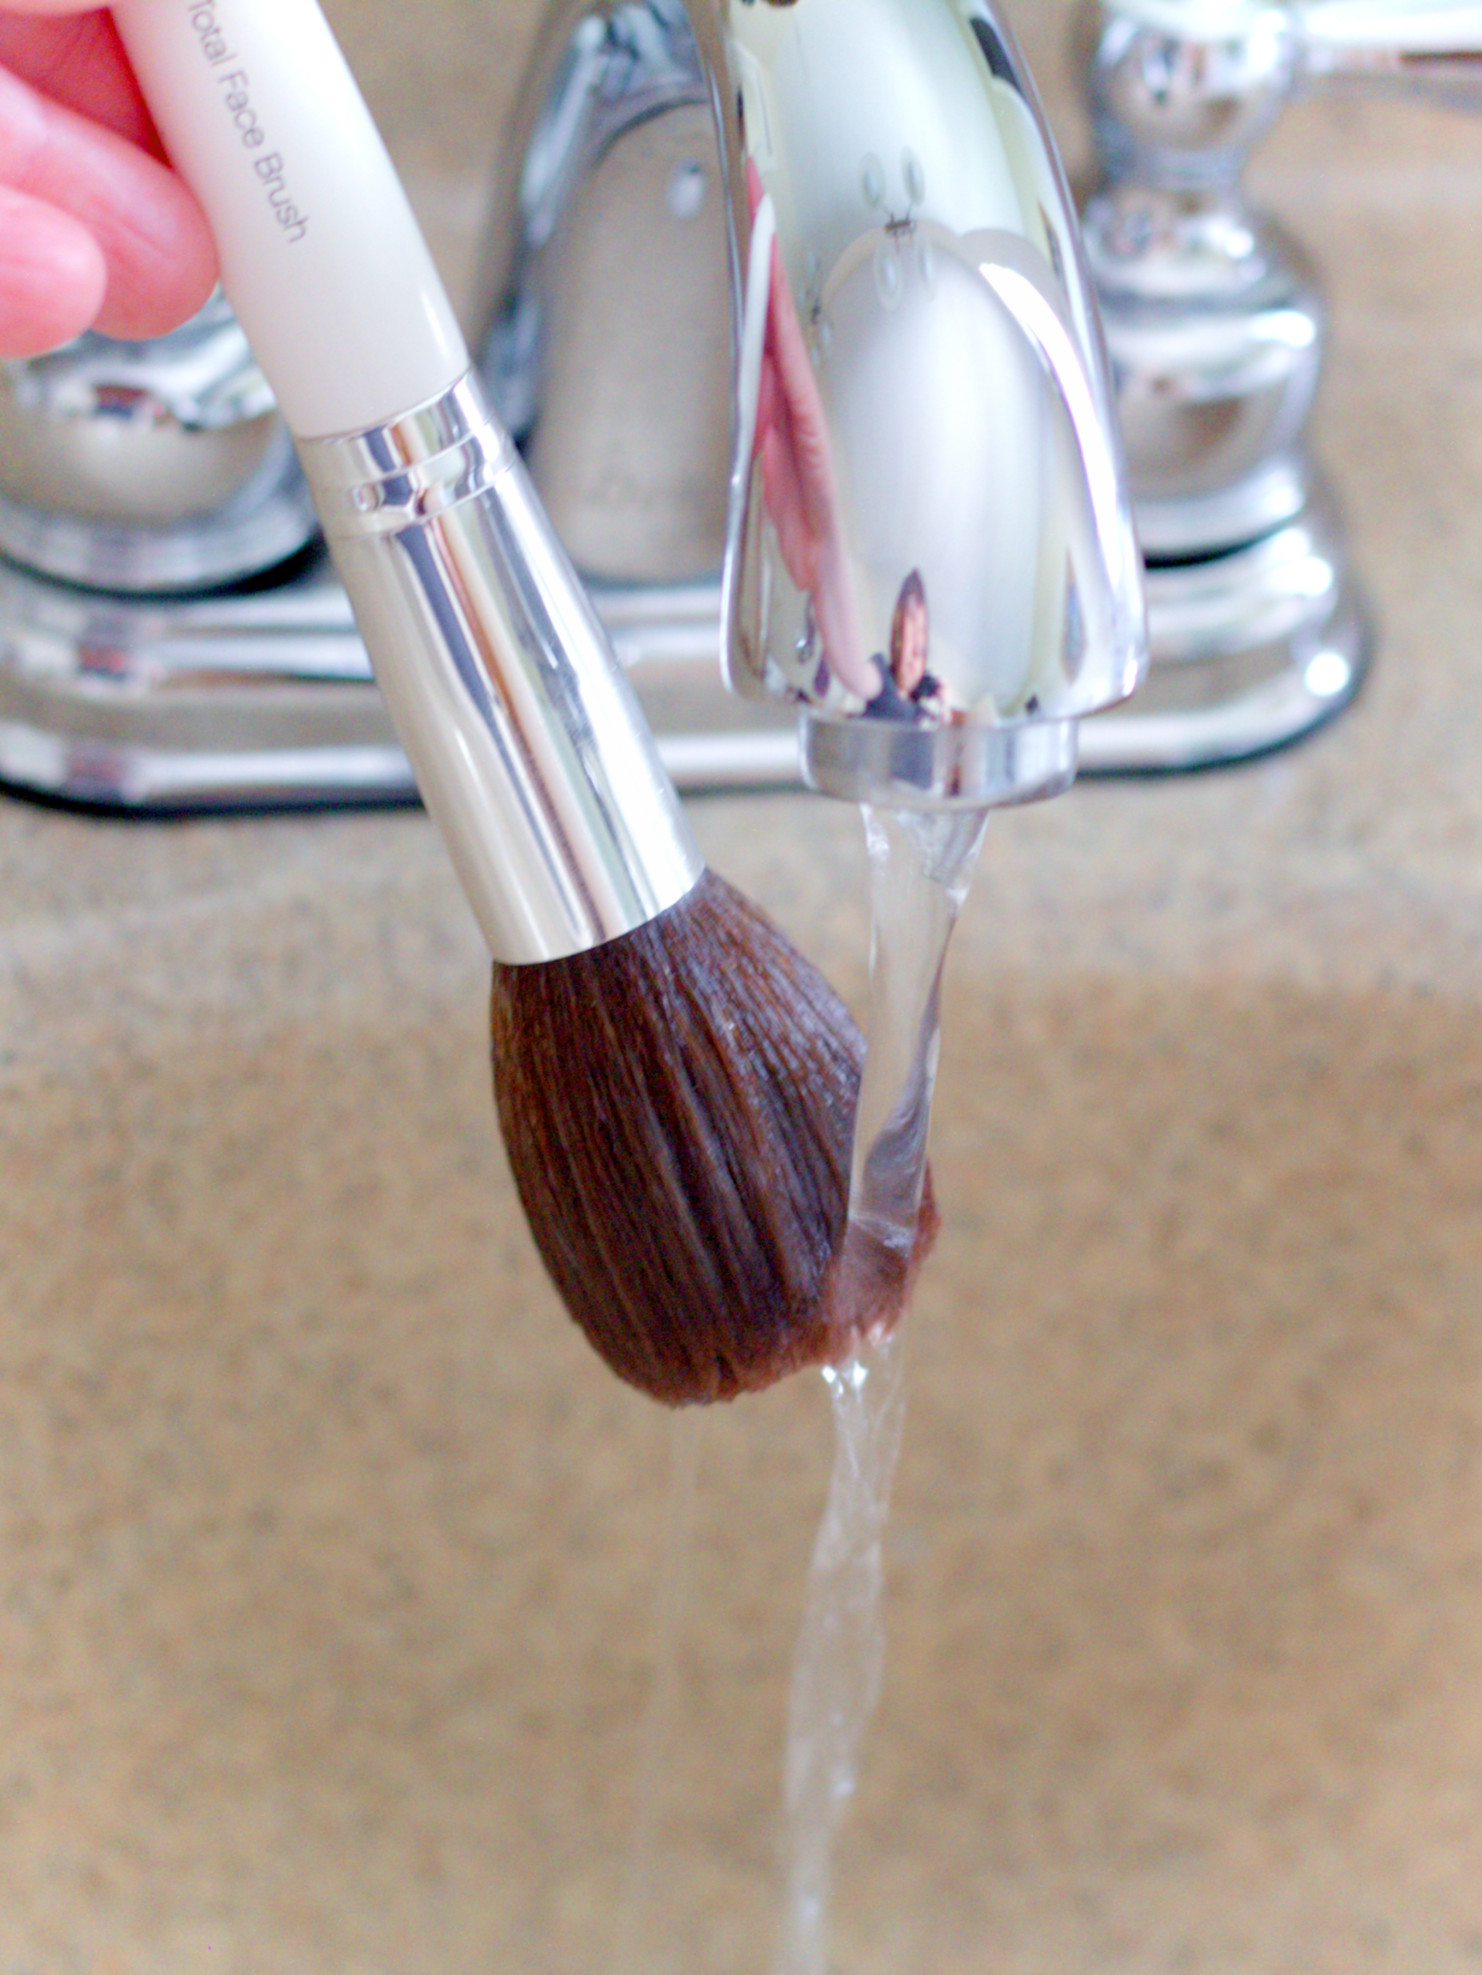 Rinsing The Makeup Brush Under Water To Get The Cleanser Out